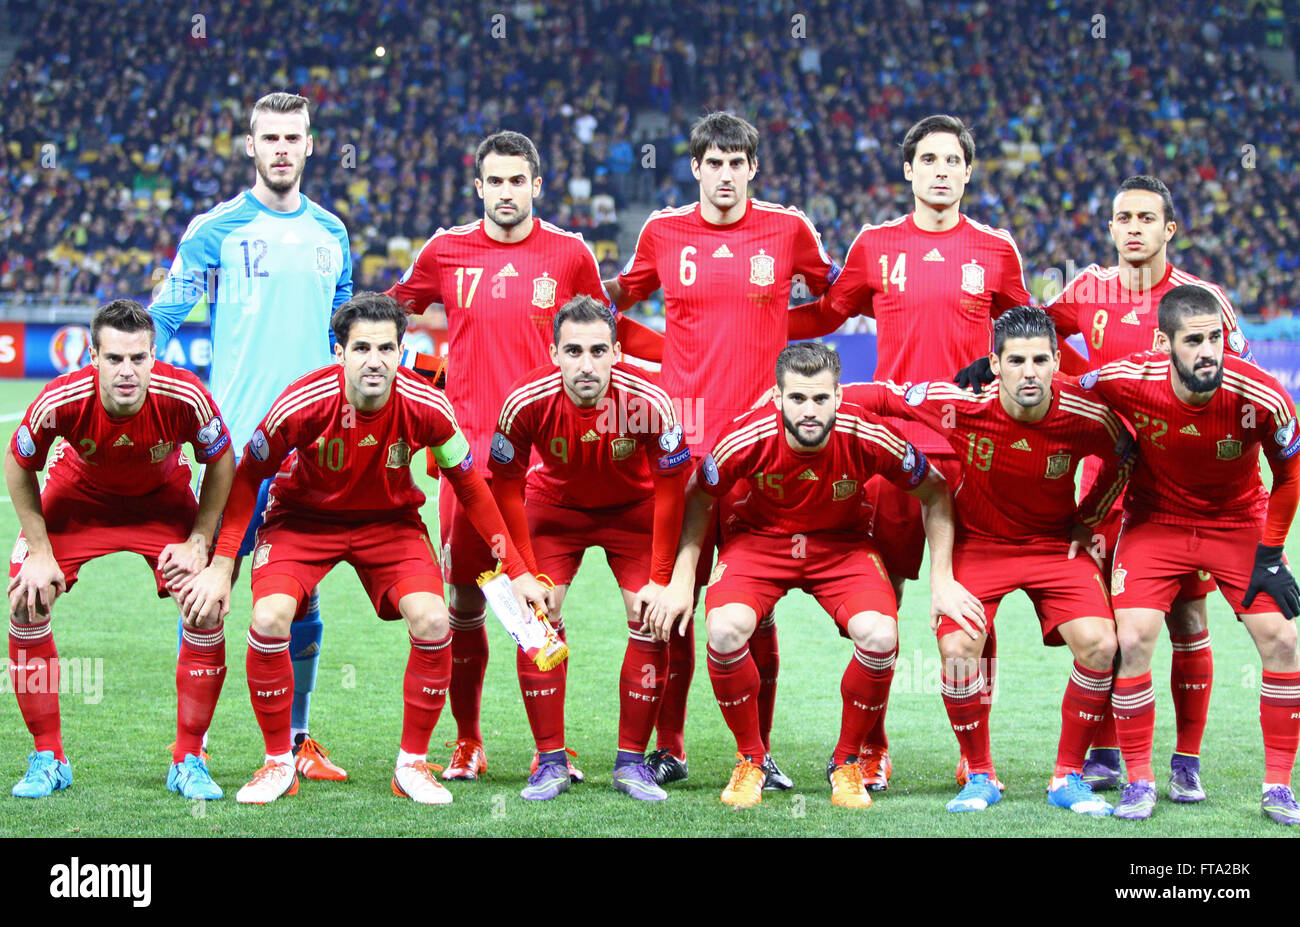 KYIV, UKRAINE - OCTOBER 12, 2015: Players of Spain National football team pose for a group photo before UEFA EURO 2016 Qualifyin Stock Photo